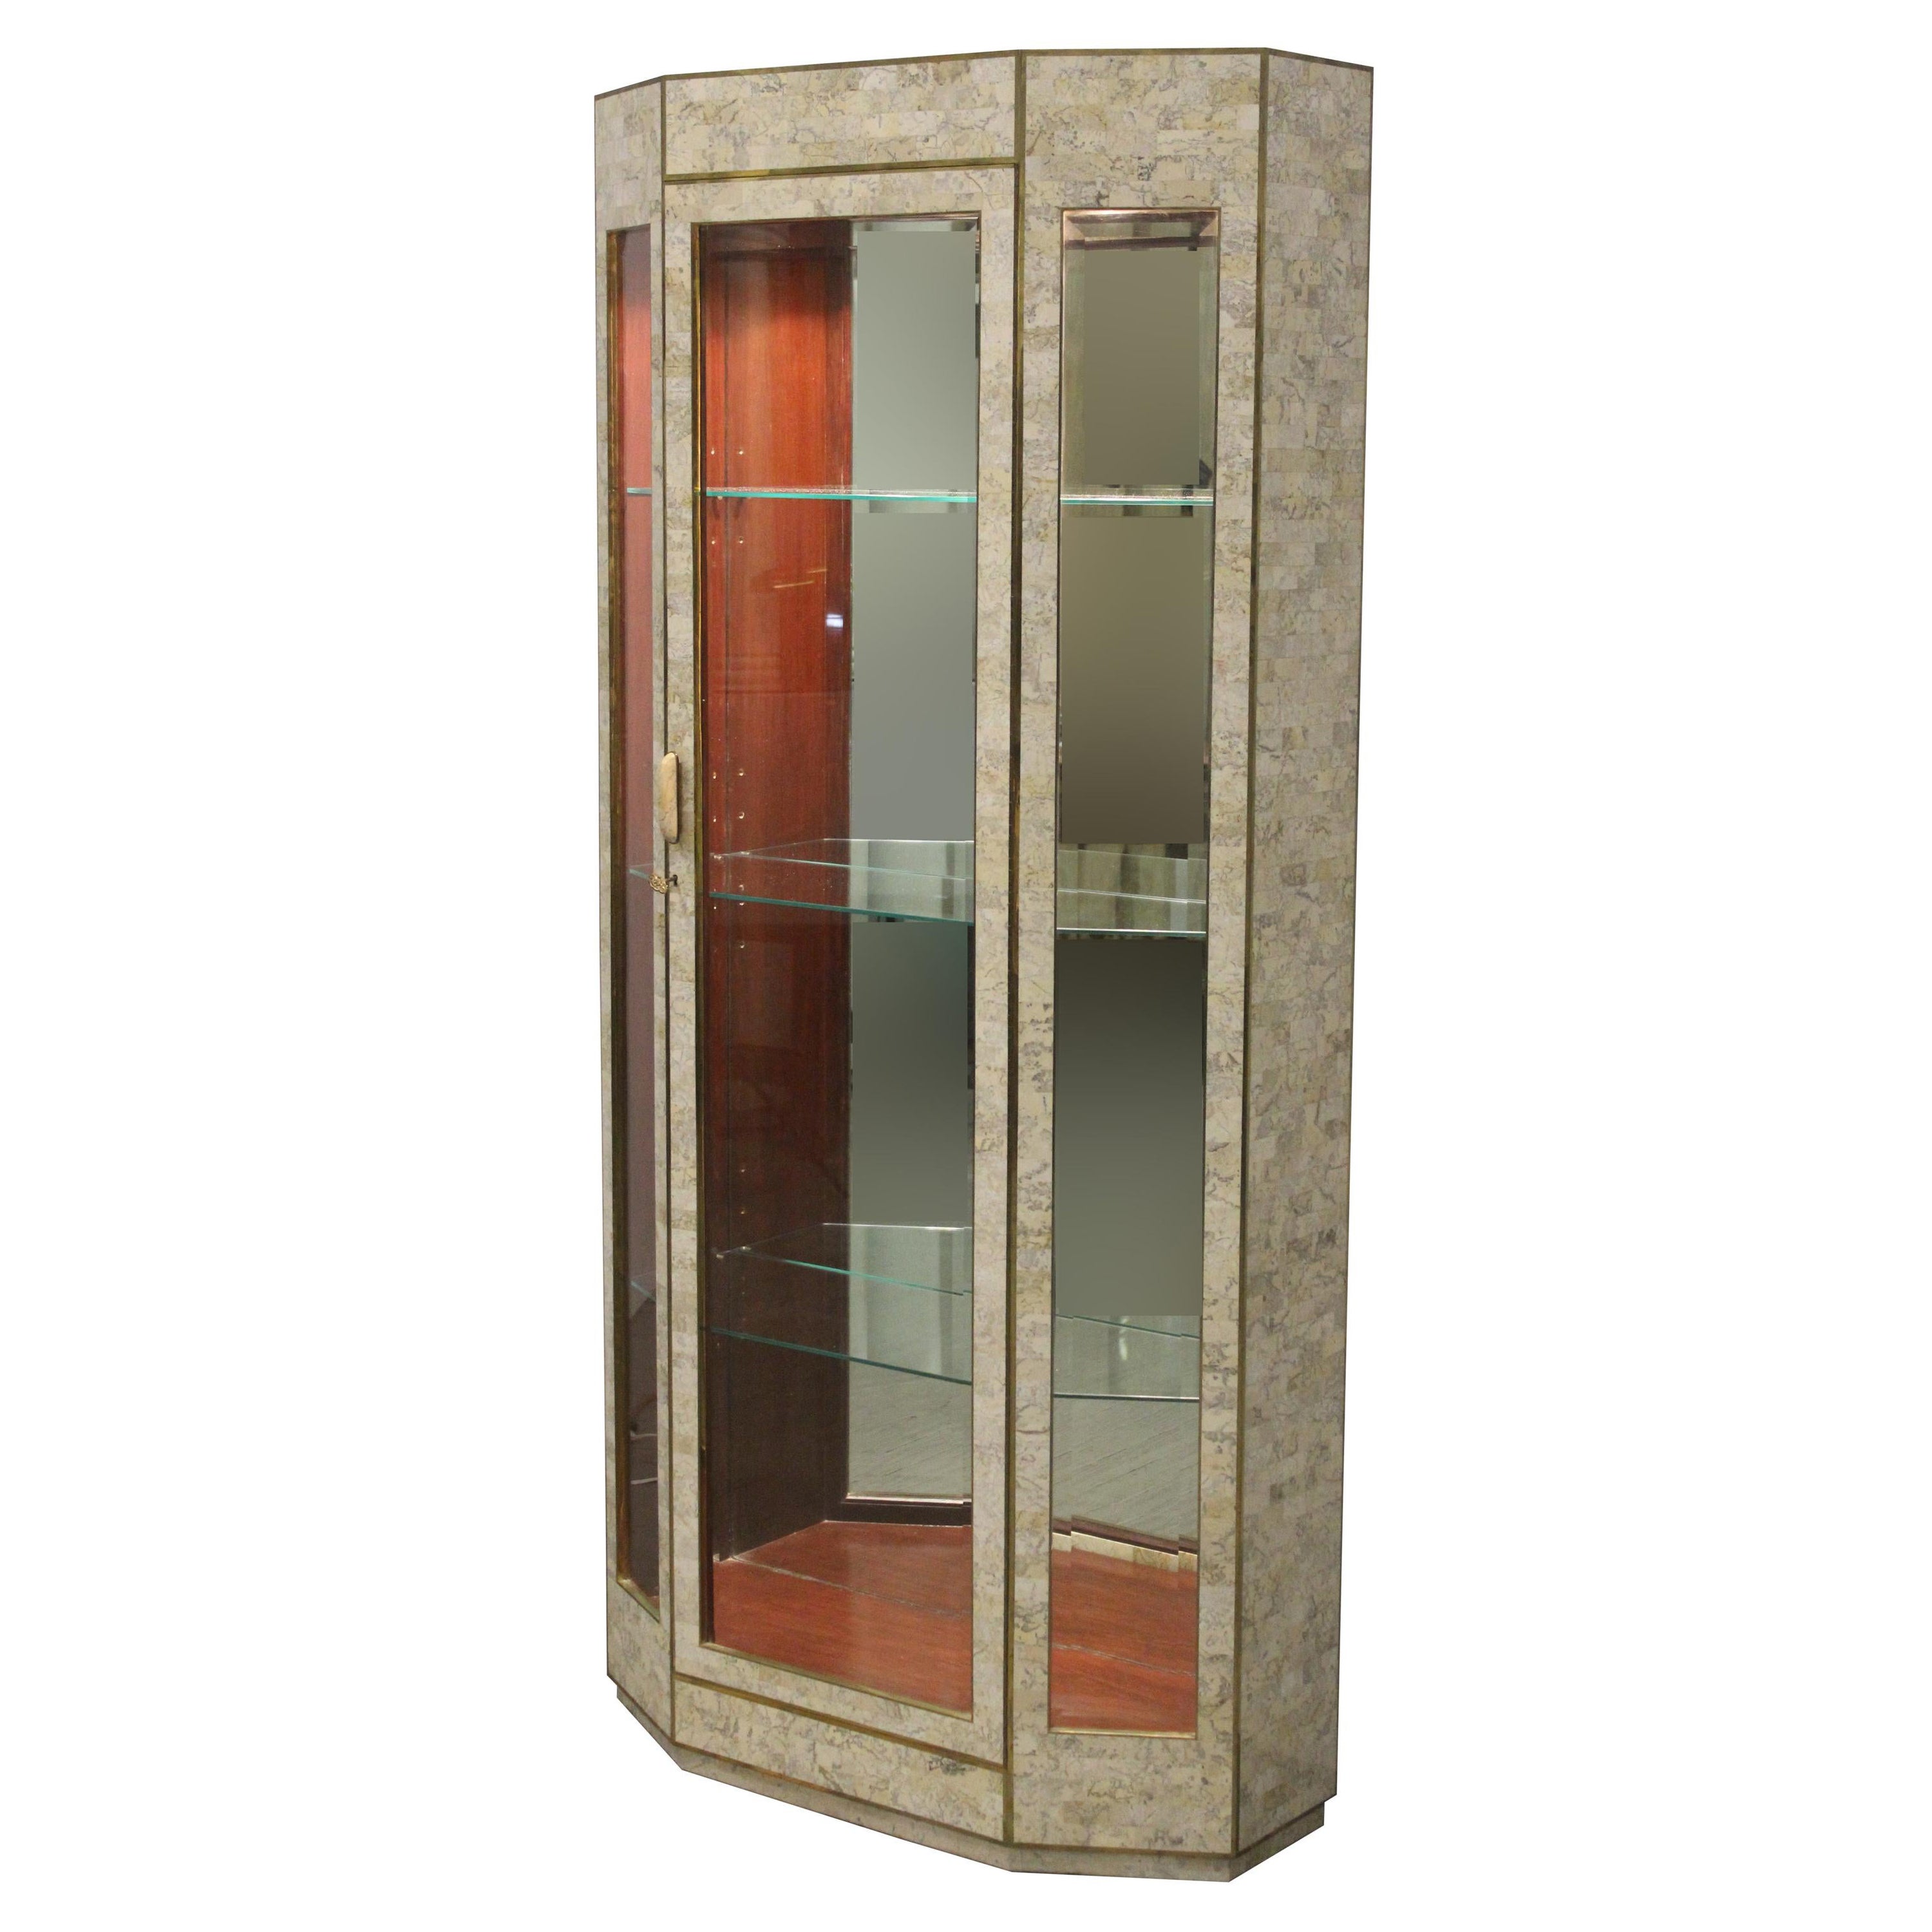 Lighted Tessellated Stone Vitrine Display Case by Maitland Smith, 1980s